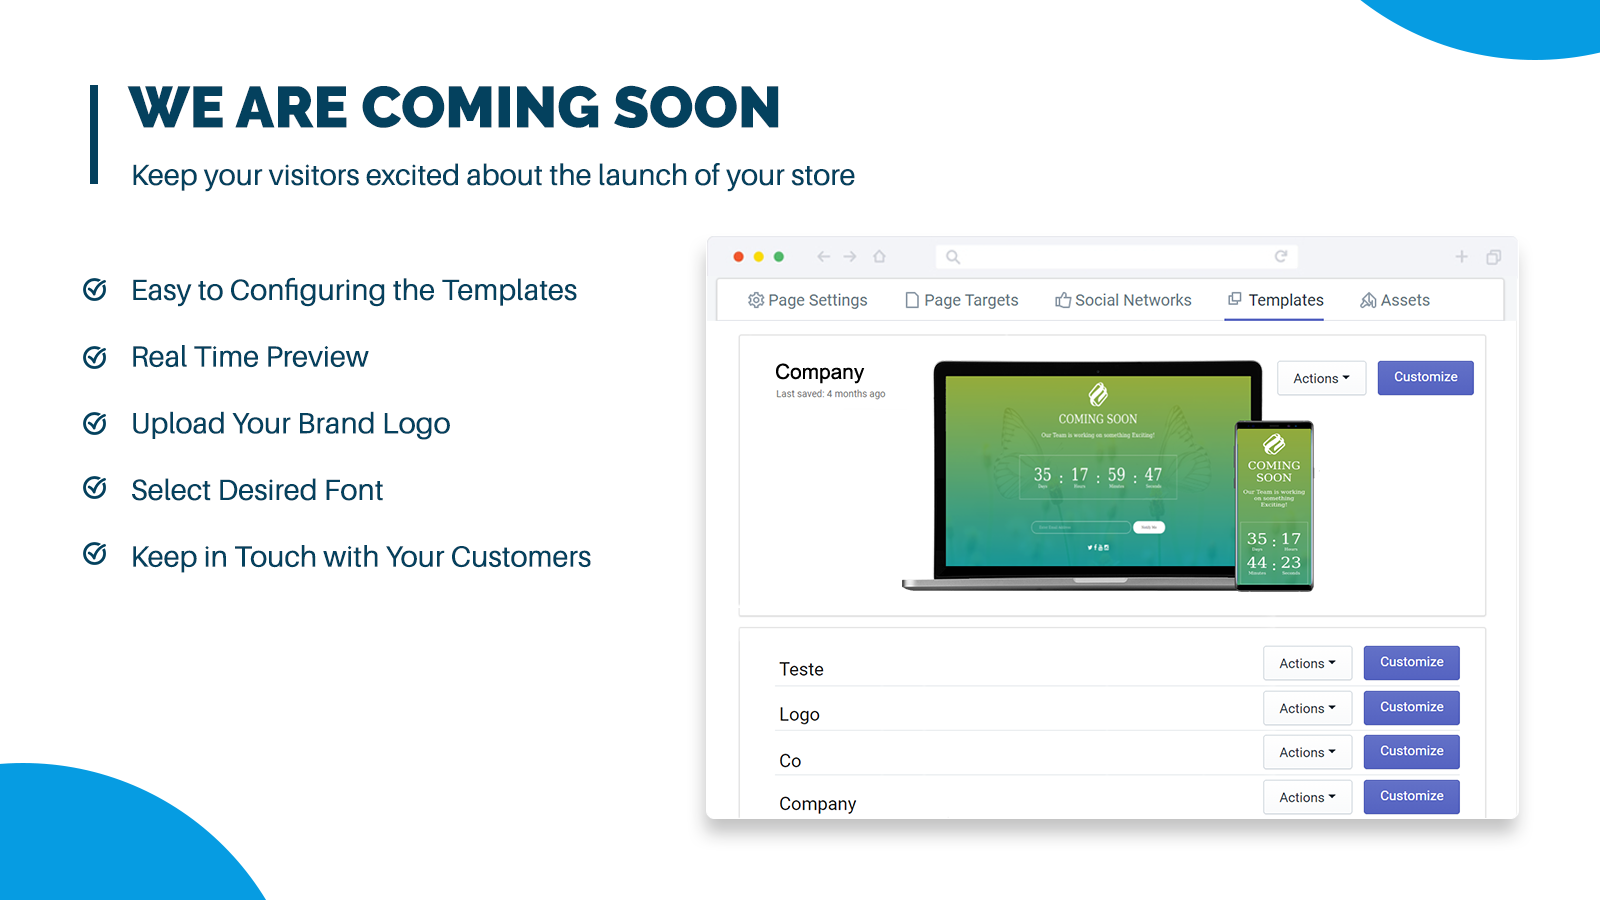 Customize pre launch landing page with your company nfomation